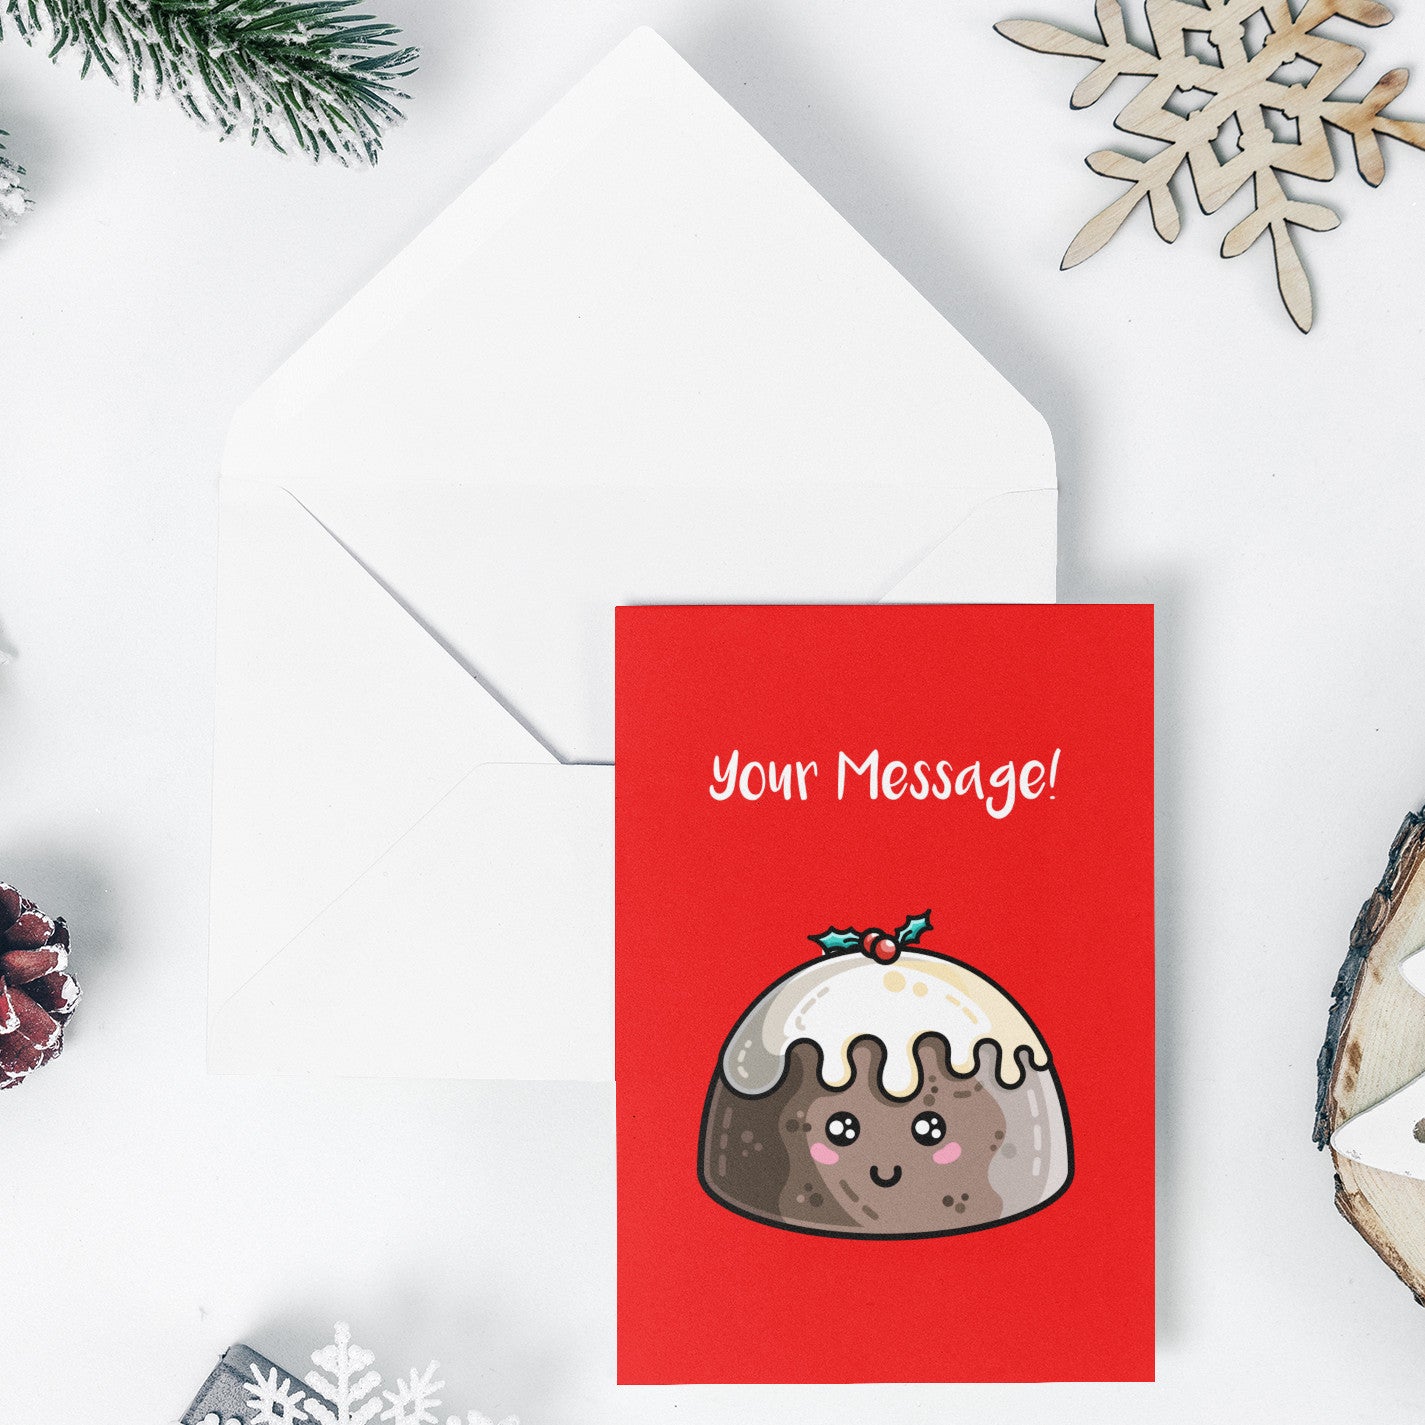 An open white envelope beneath a red greeting card with a design of a kawaii cute smiling Christmas pudding with cream on top and a sprig of holly and your message in white above